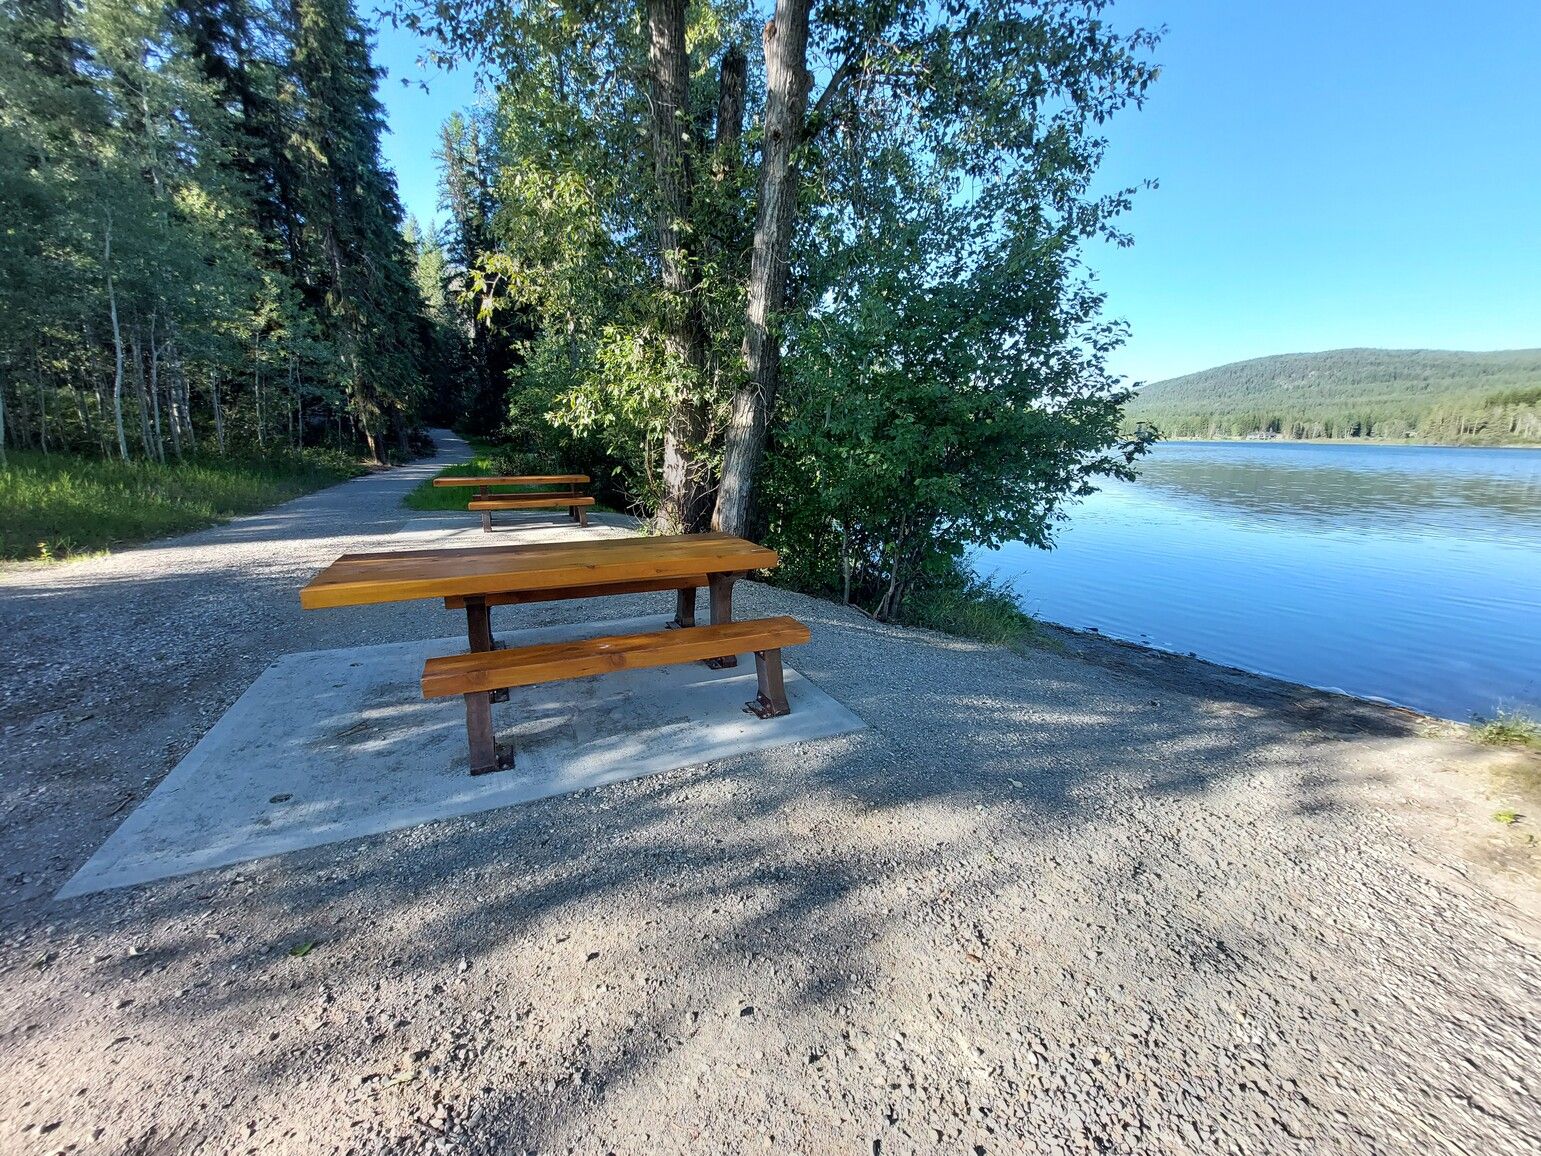 Picnic tables in the day-use area beside the lake at Jimsmith Lake Park.